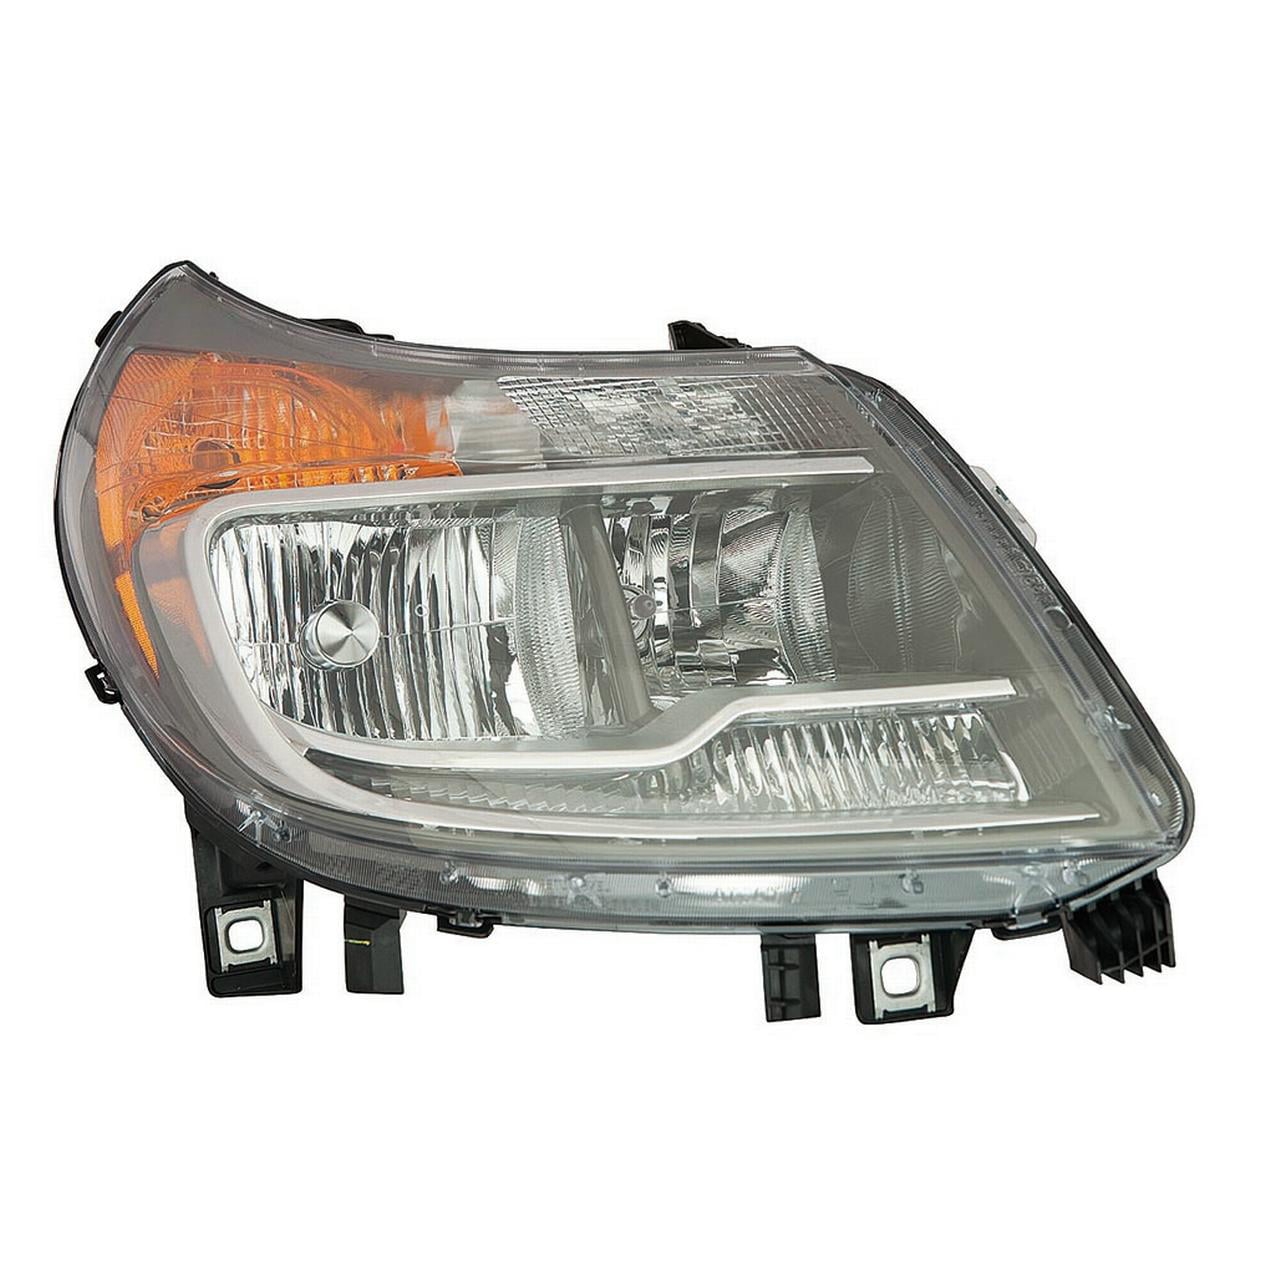 2017 Dodge Promaster 2500 Headlight Bulb Replacement